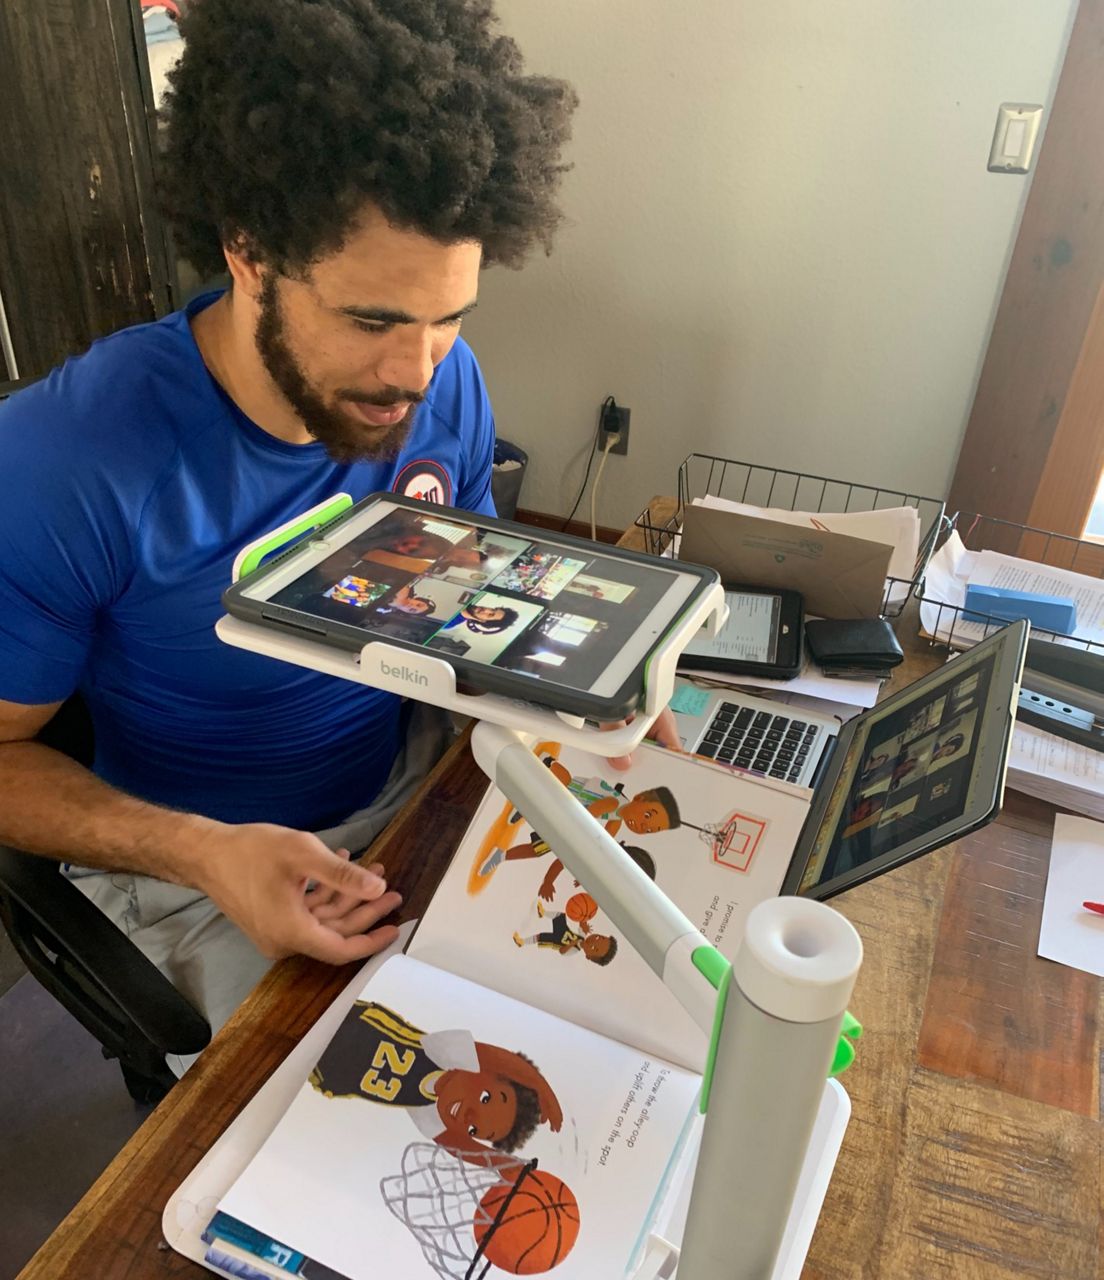 Kylen Granson looks at books and images in this photo from April 2021. (Spectrum News 1/Travis Recek)